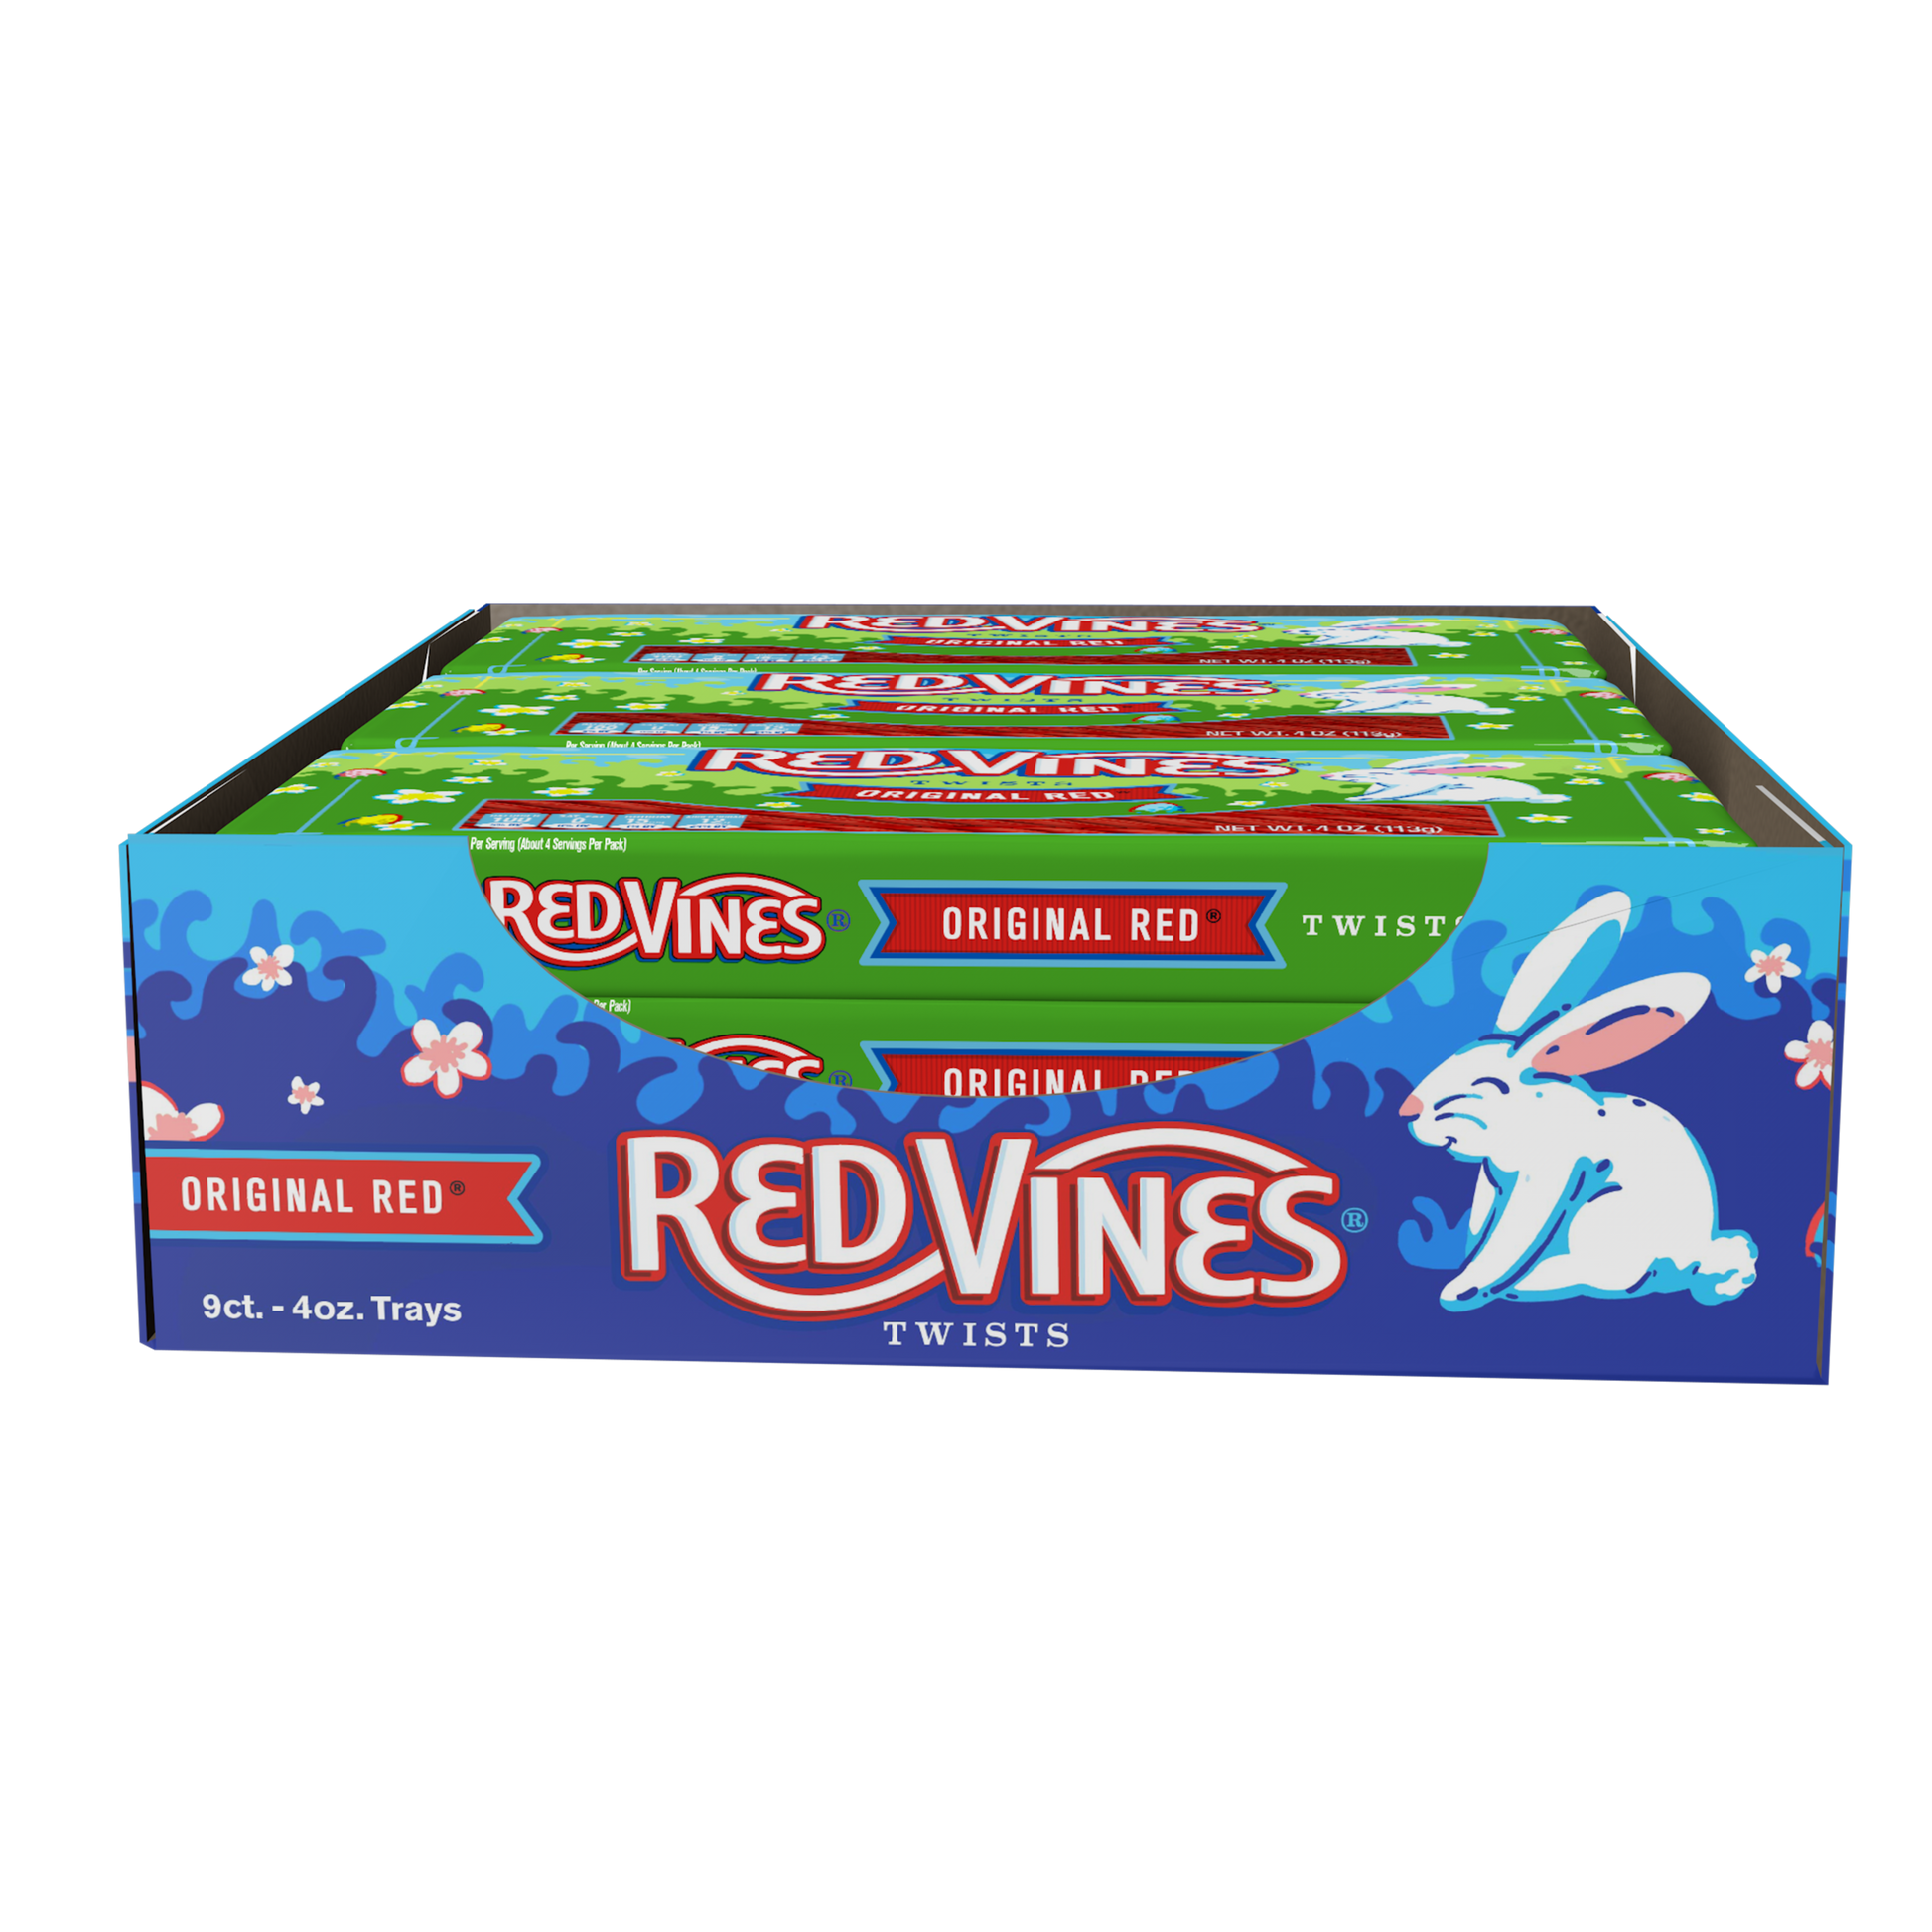 9 count box of RED VINES Easter Candy 4oz Trays